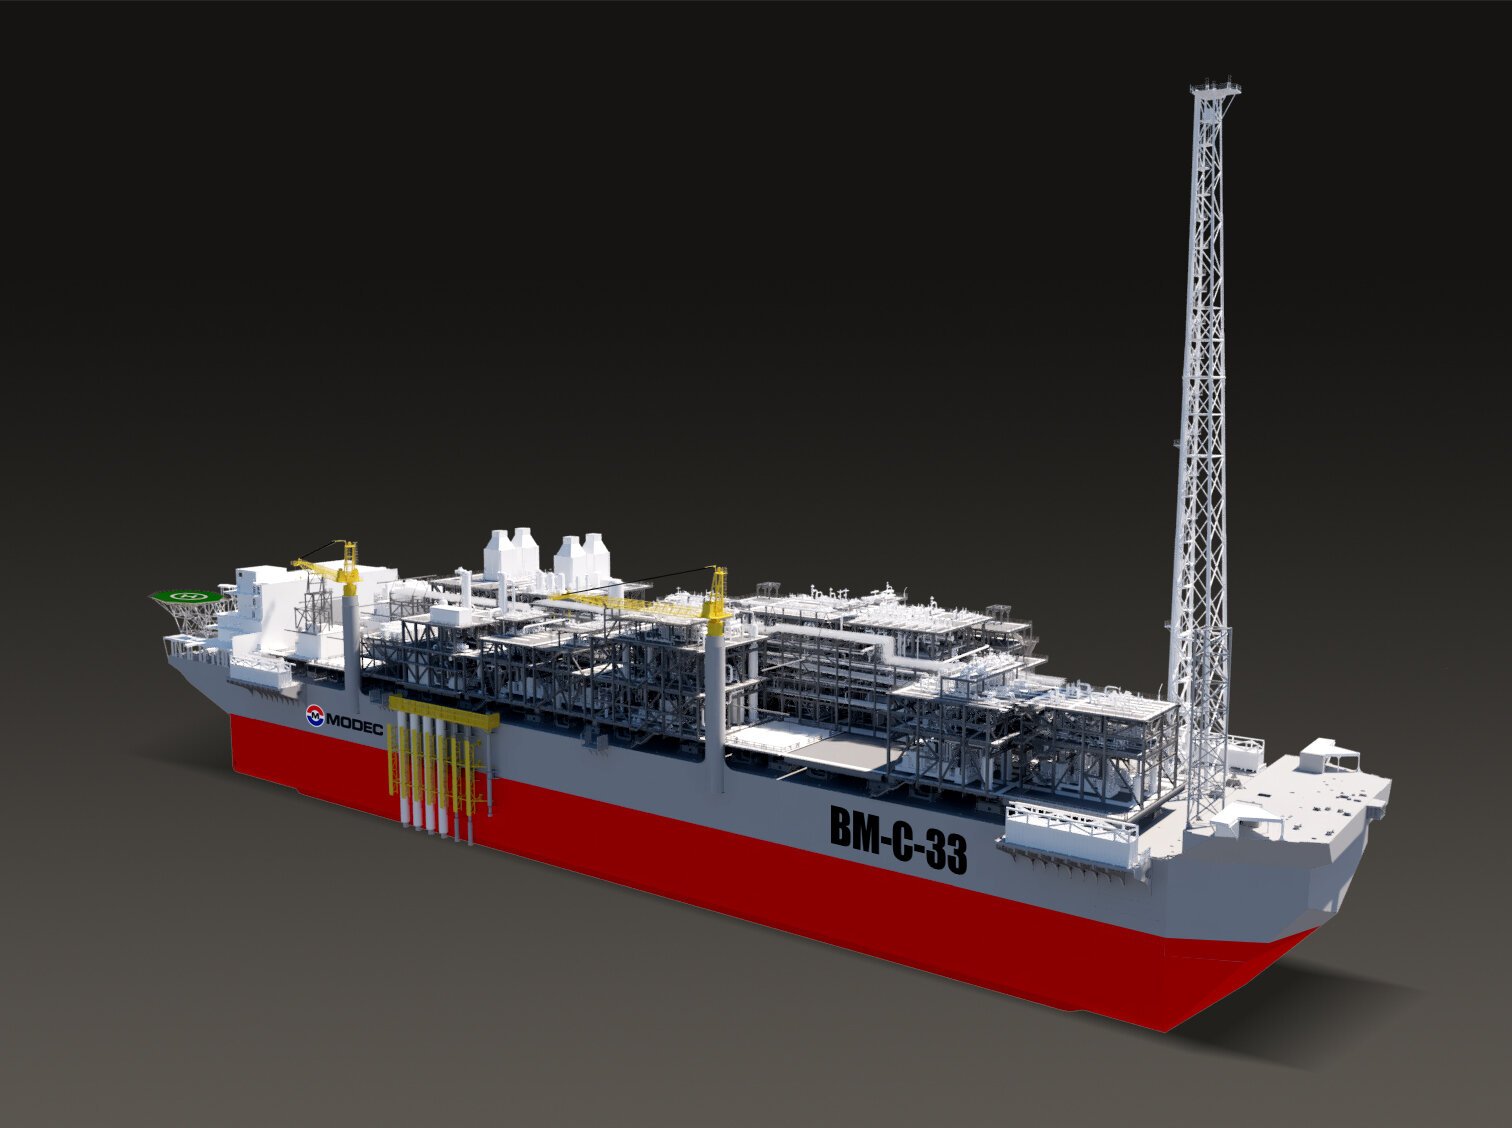 FPSO for the BM-C-33 project; Source: MODEC